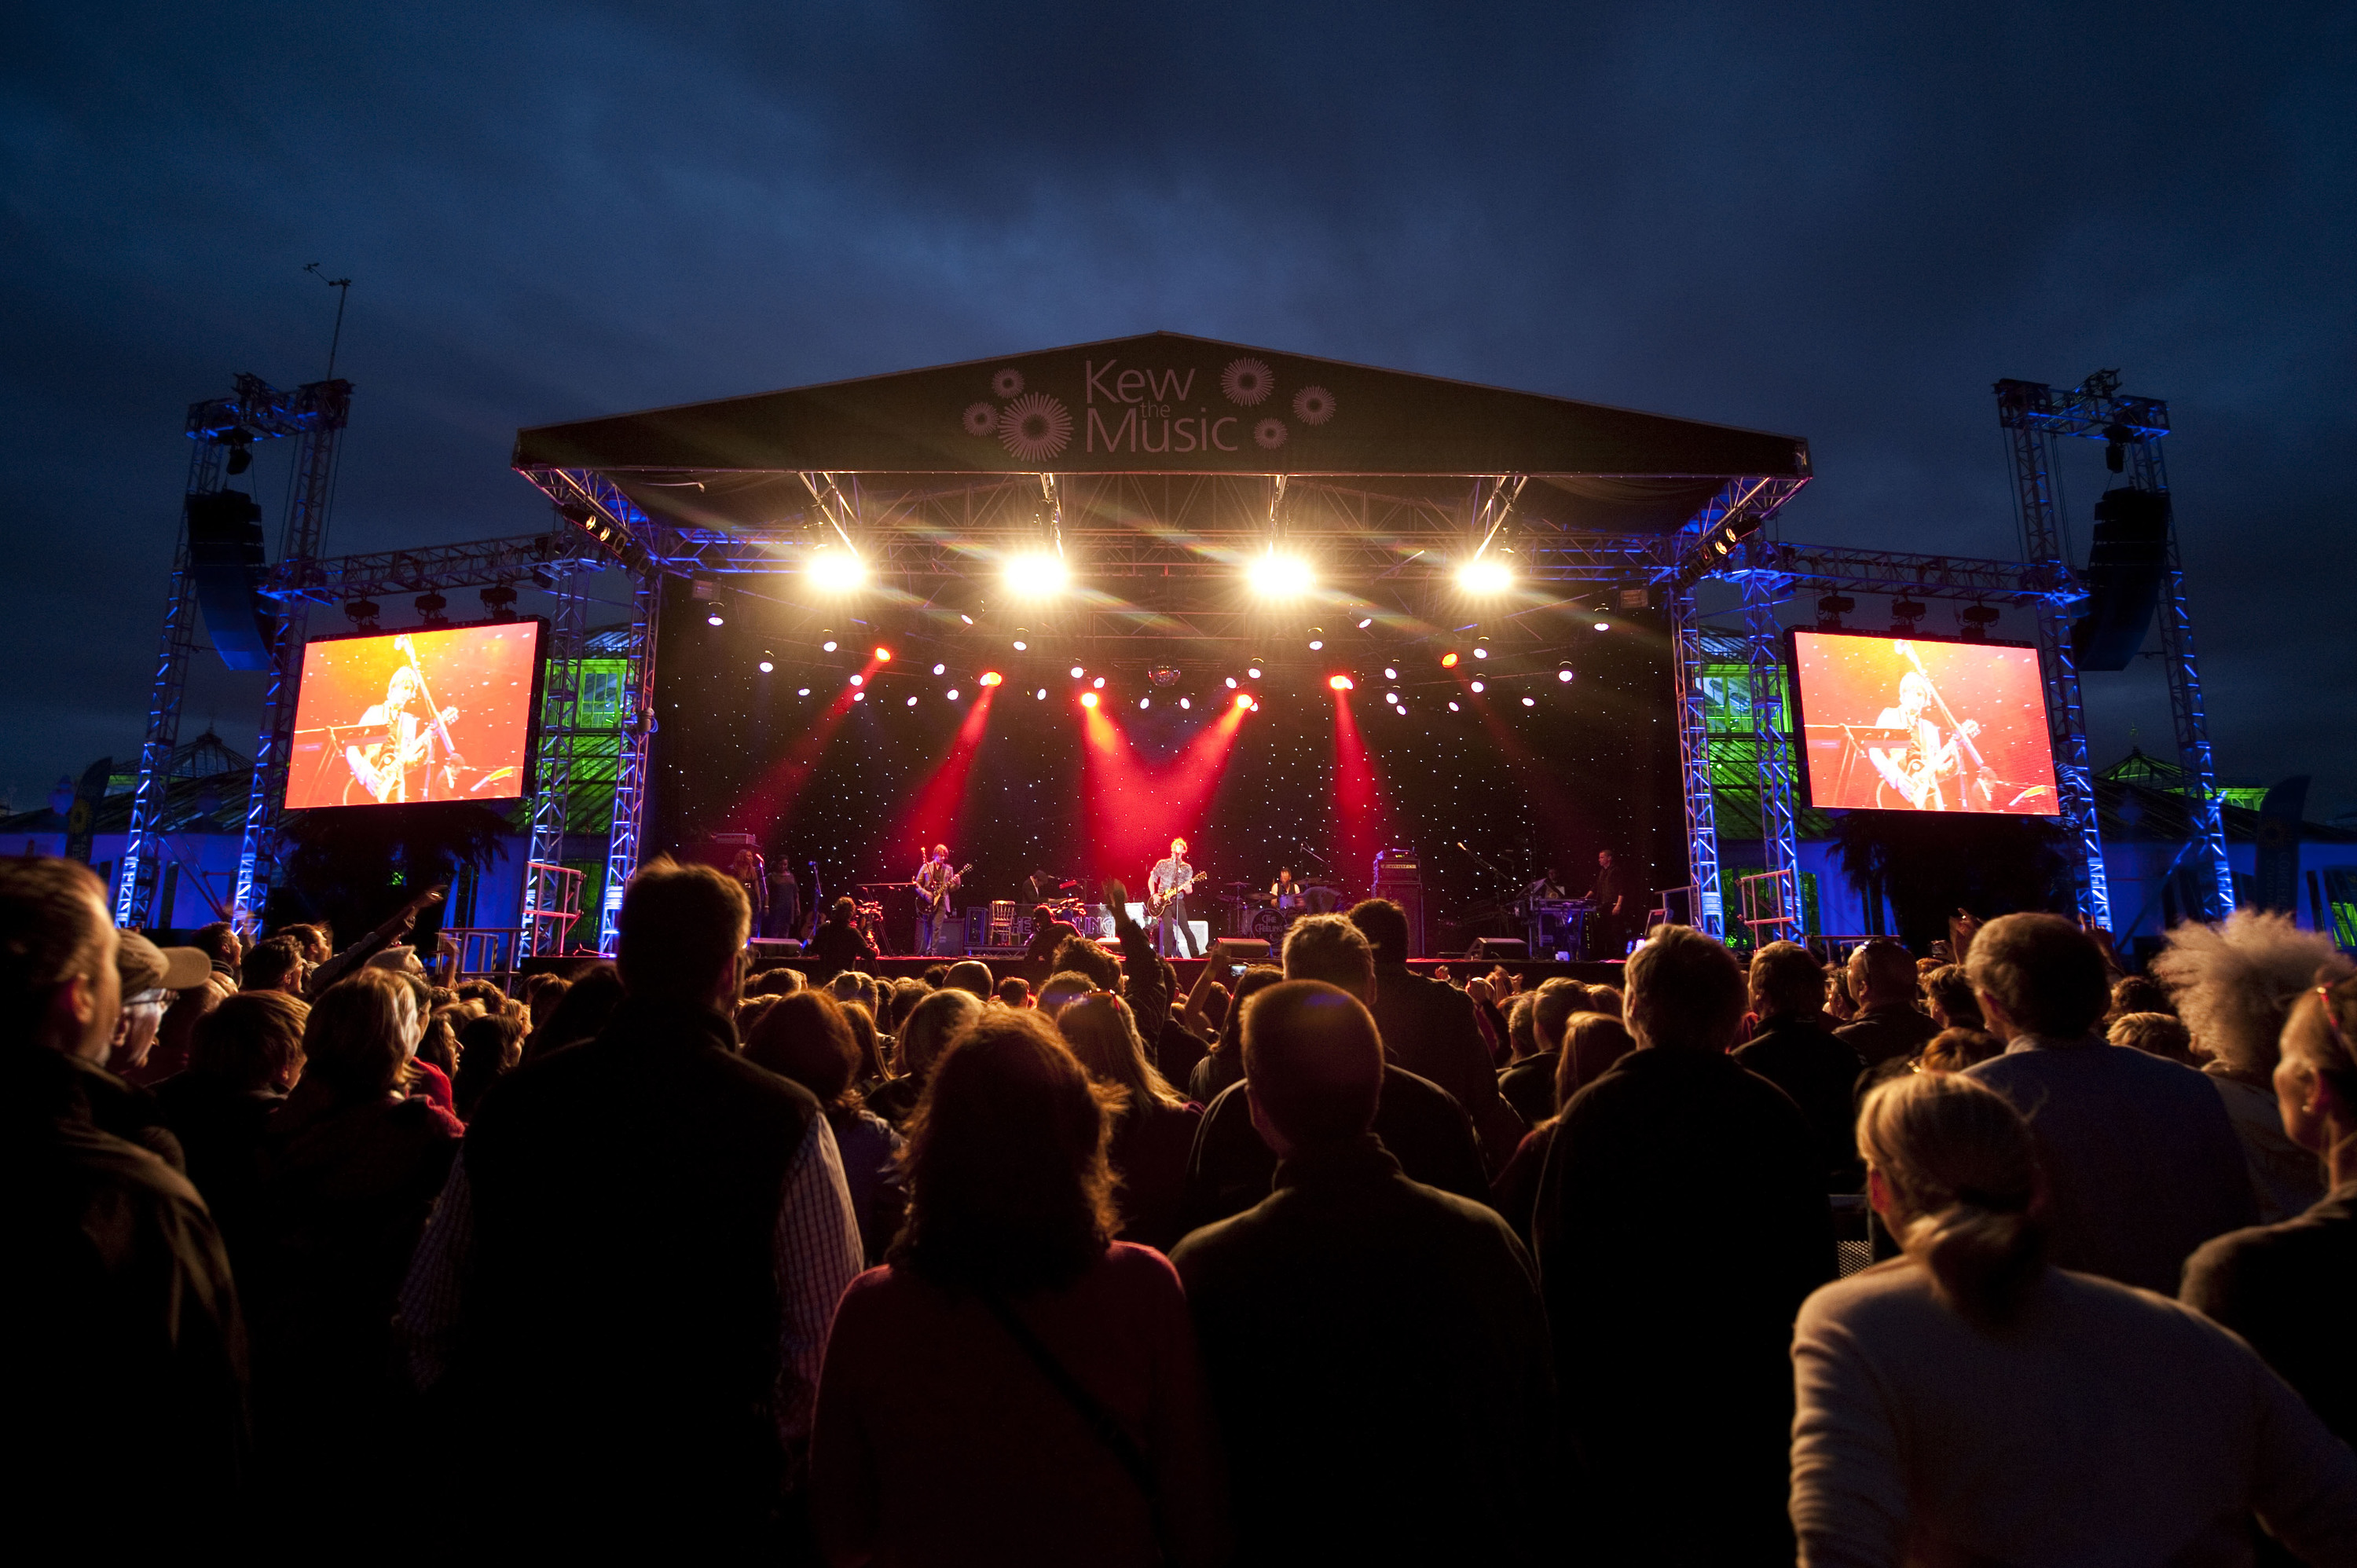 Outdoor gigs and openair concerts in London